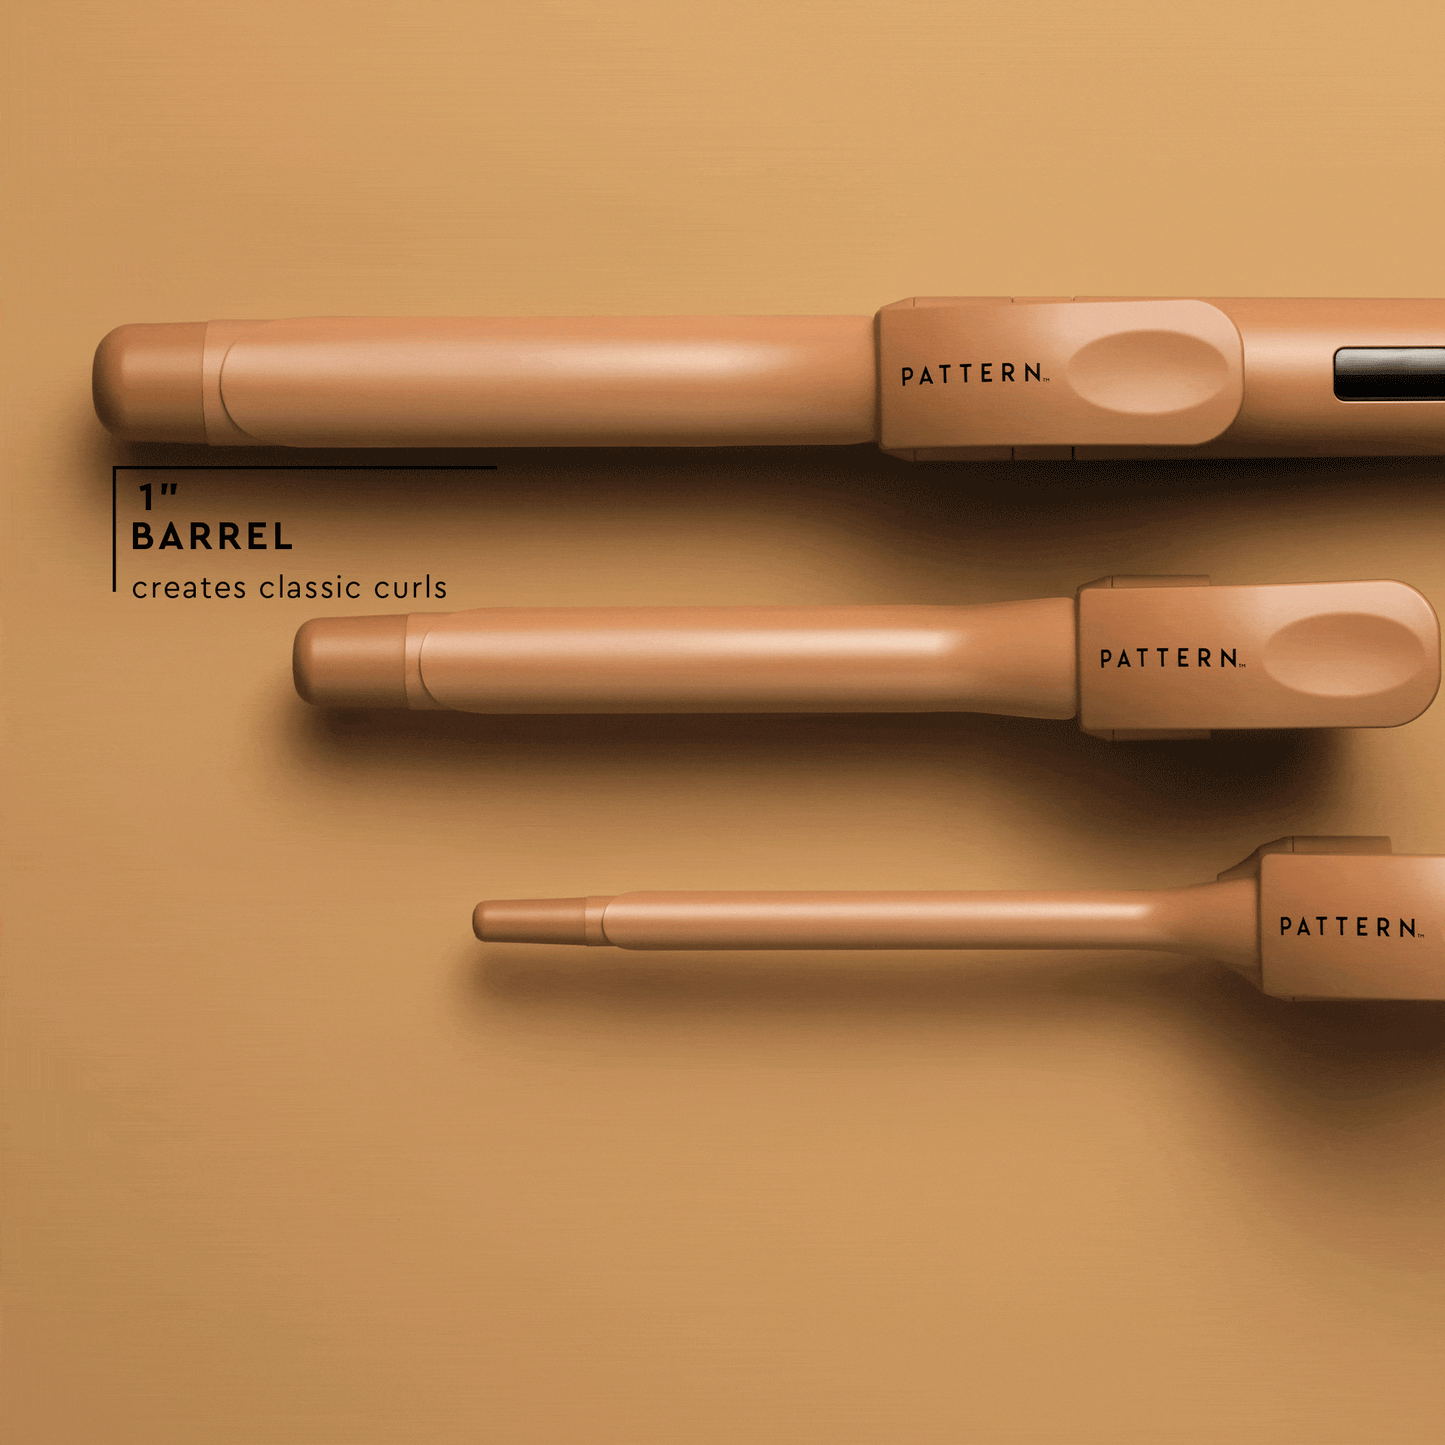 The Interchangeable Curling Iron